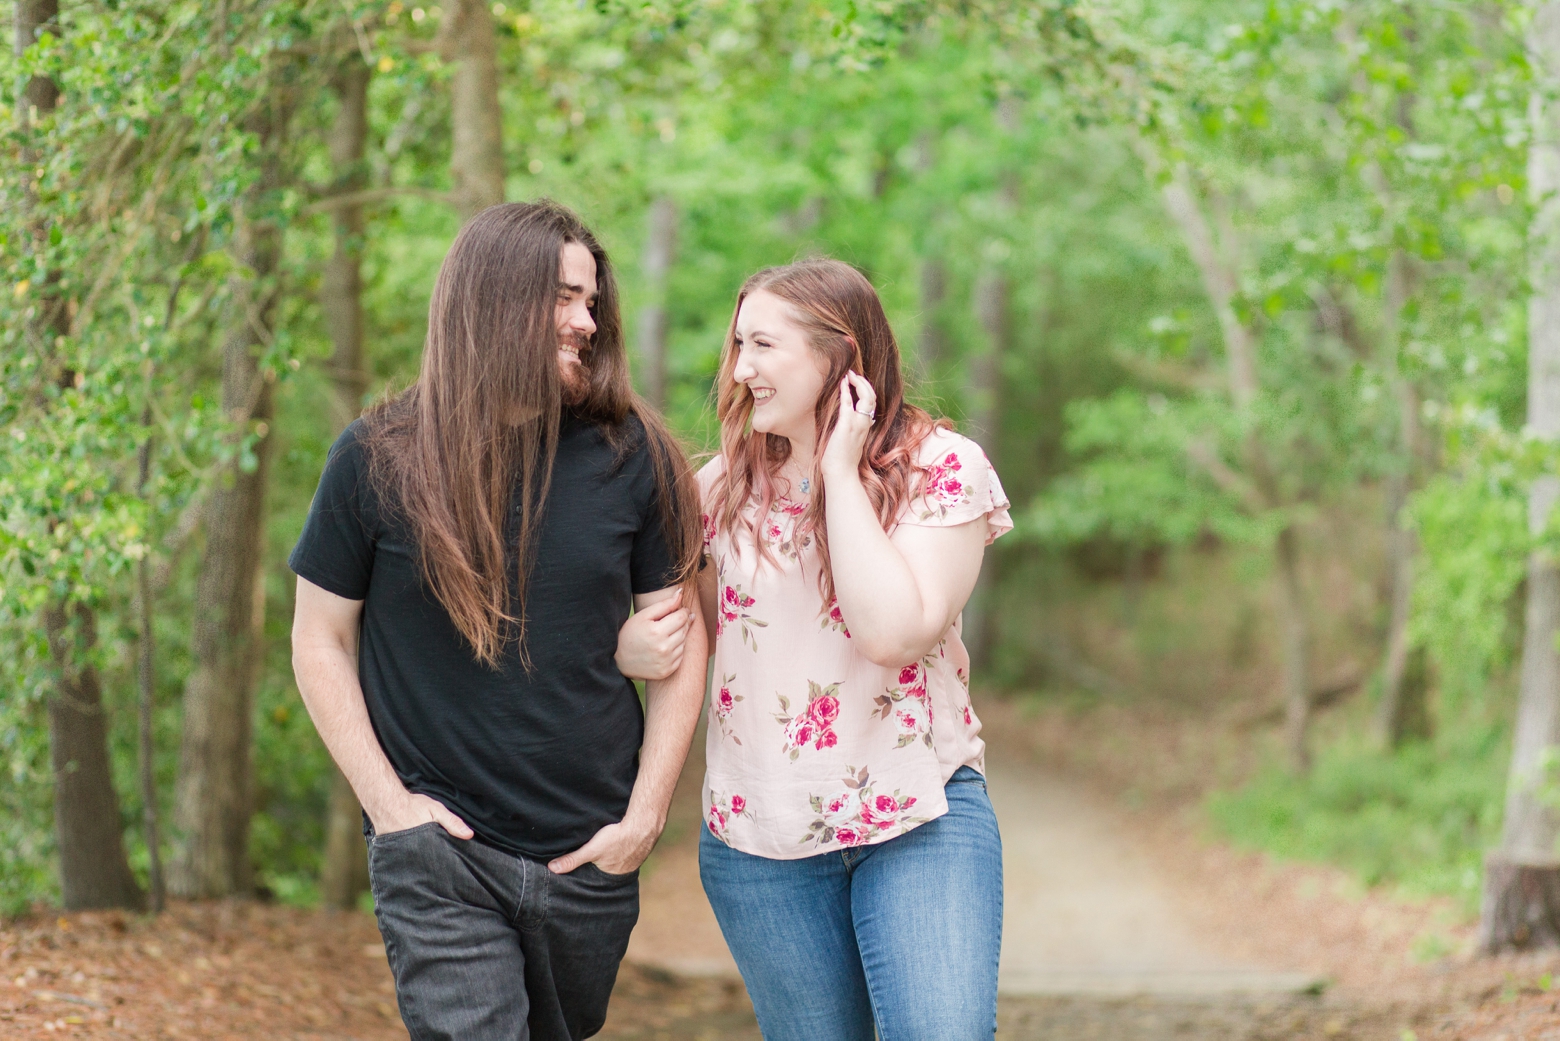 Noland Trail Engagement Photography by Angie McPherson Photography